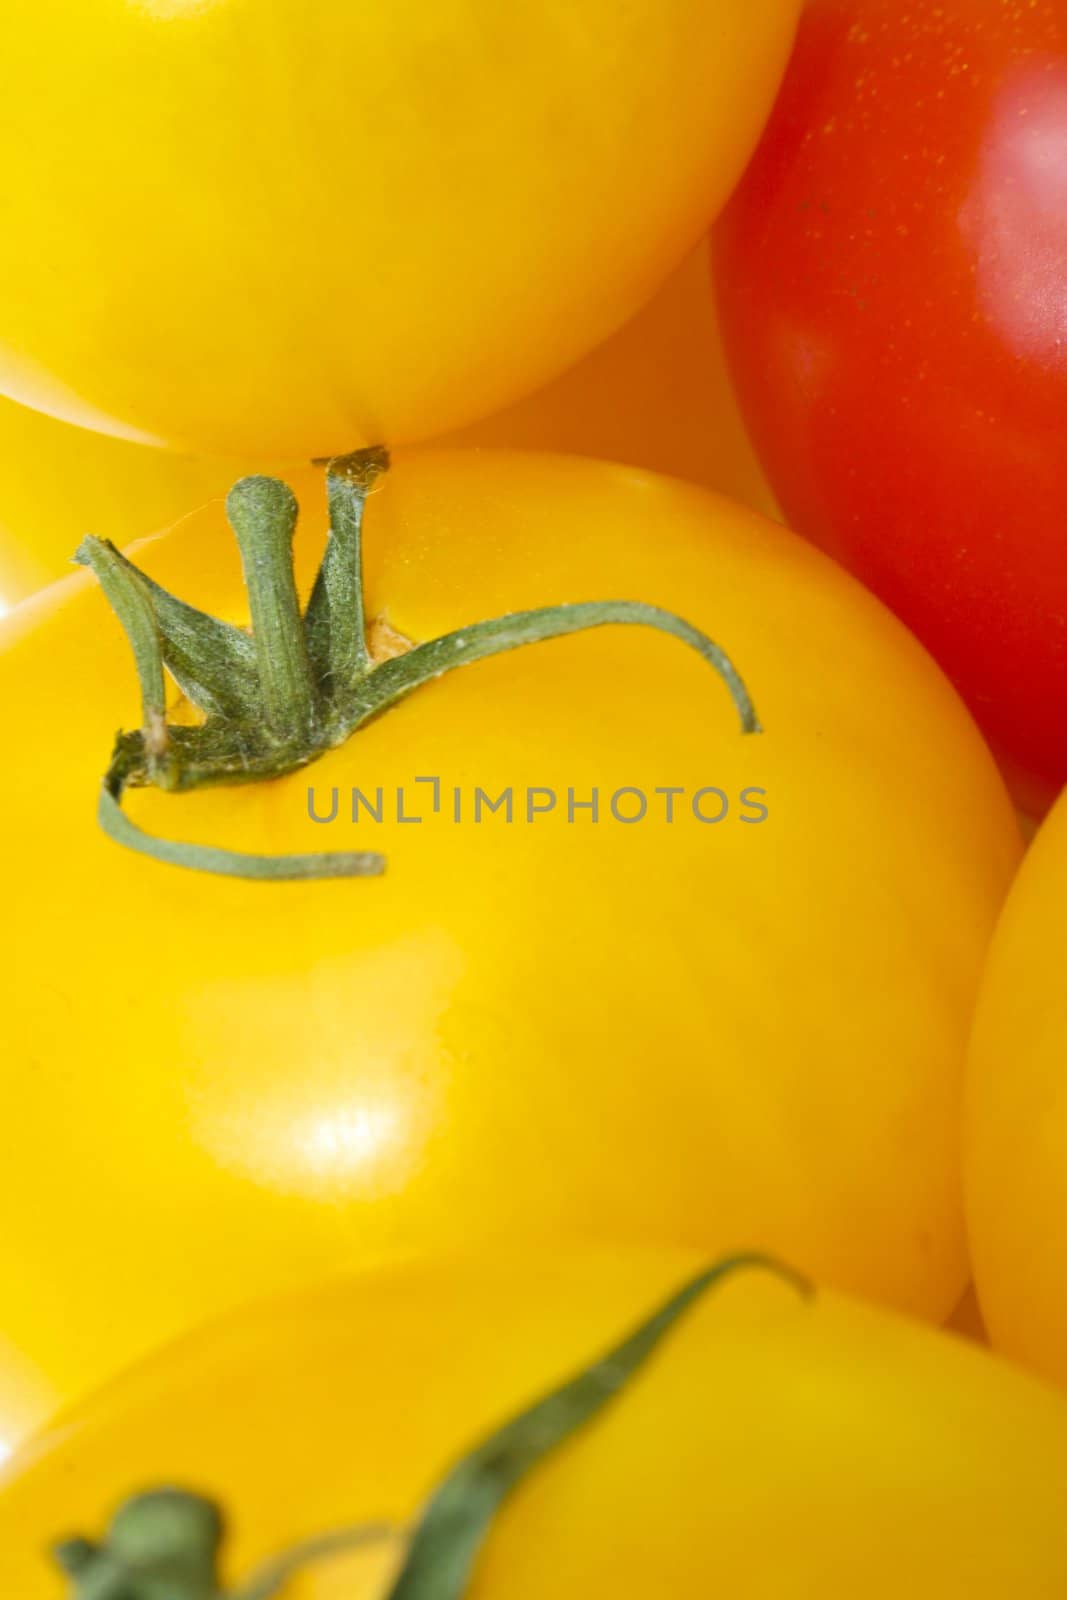 Tomatoes by timscottrom